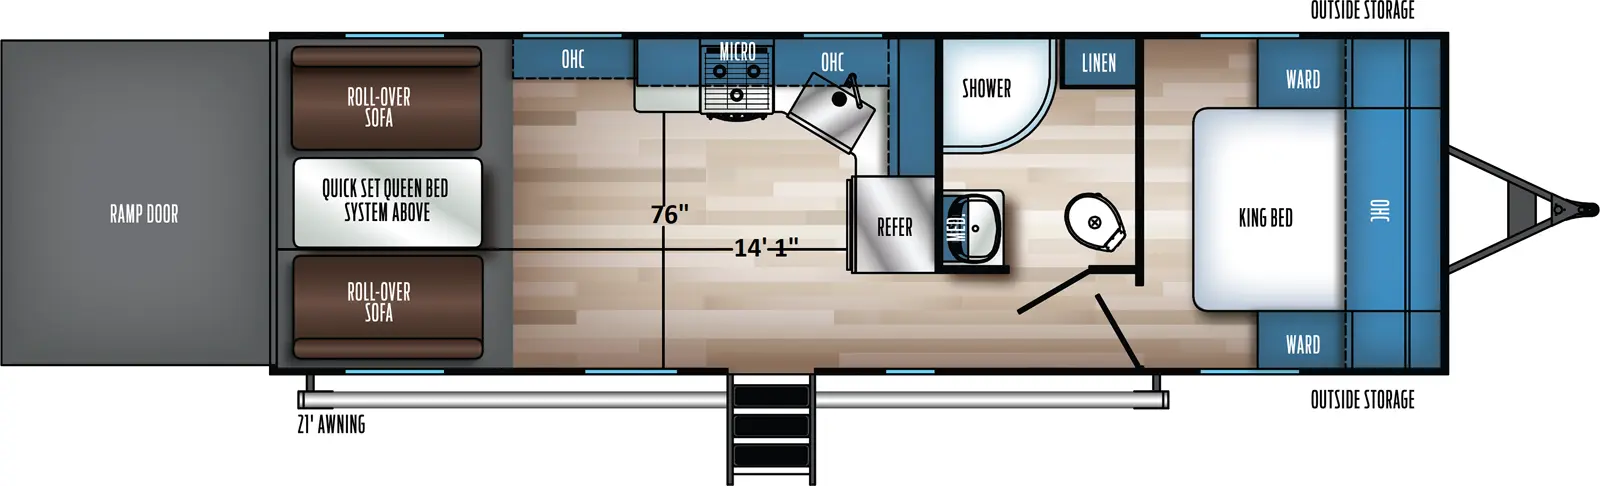 The 25SUT has one entry and zero slideouts. Exterior features front outside storage, 21 foot awning, and rear ramp door. Interior layout front to back: foot-facing king bed with overhead cabinet, and wardrobes on each side; off-door side full bathroom with linen closet and medicine cabinet; door side entry; refrigerator and kitchen counter with overhead cabinet frap from inner wall to off-door side with sink, microwave, and cooktop; rear opposing roll-over sofas with table, and quick set queen bed system above.